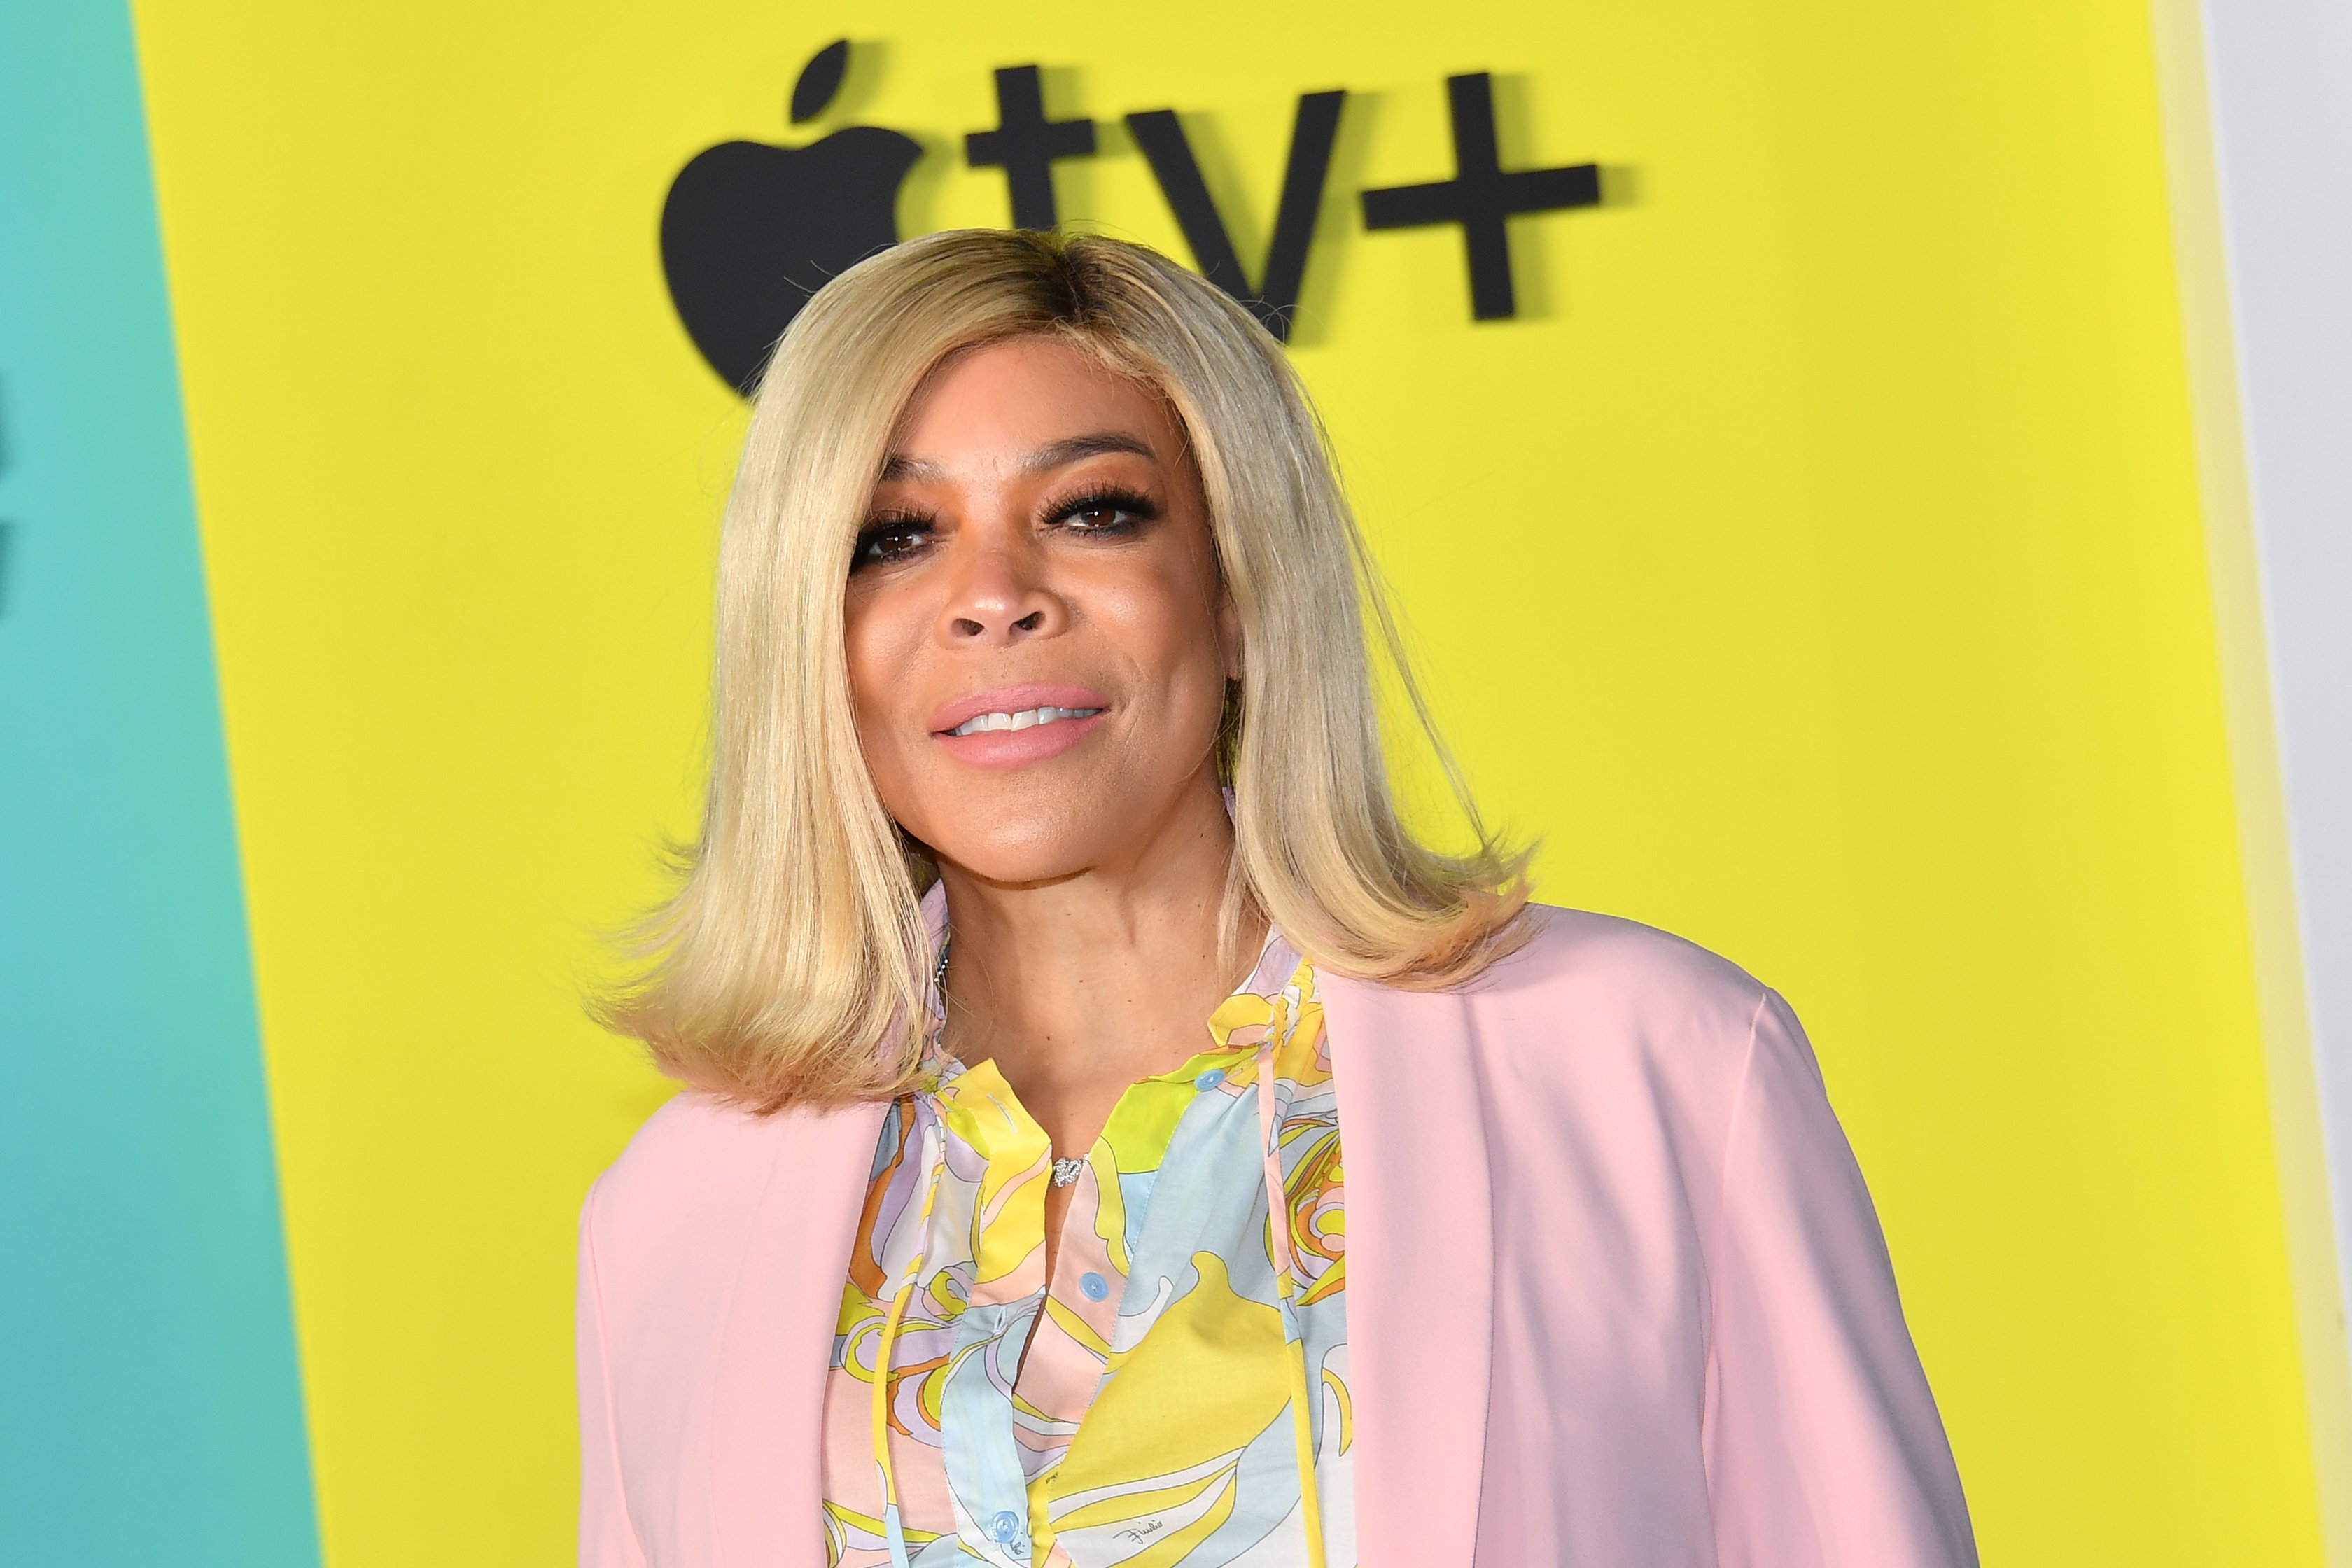 US television presenter Wendy Williams arrives for Apples "The Morning Show" global premiere at Lincoln Center- David Geffen Hall on October 28, 2019 in New York. 